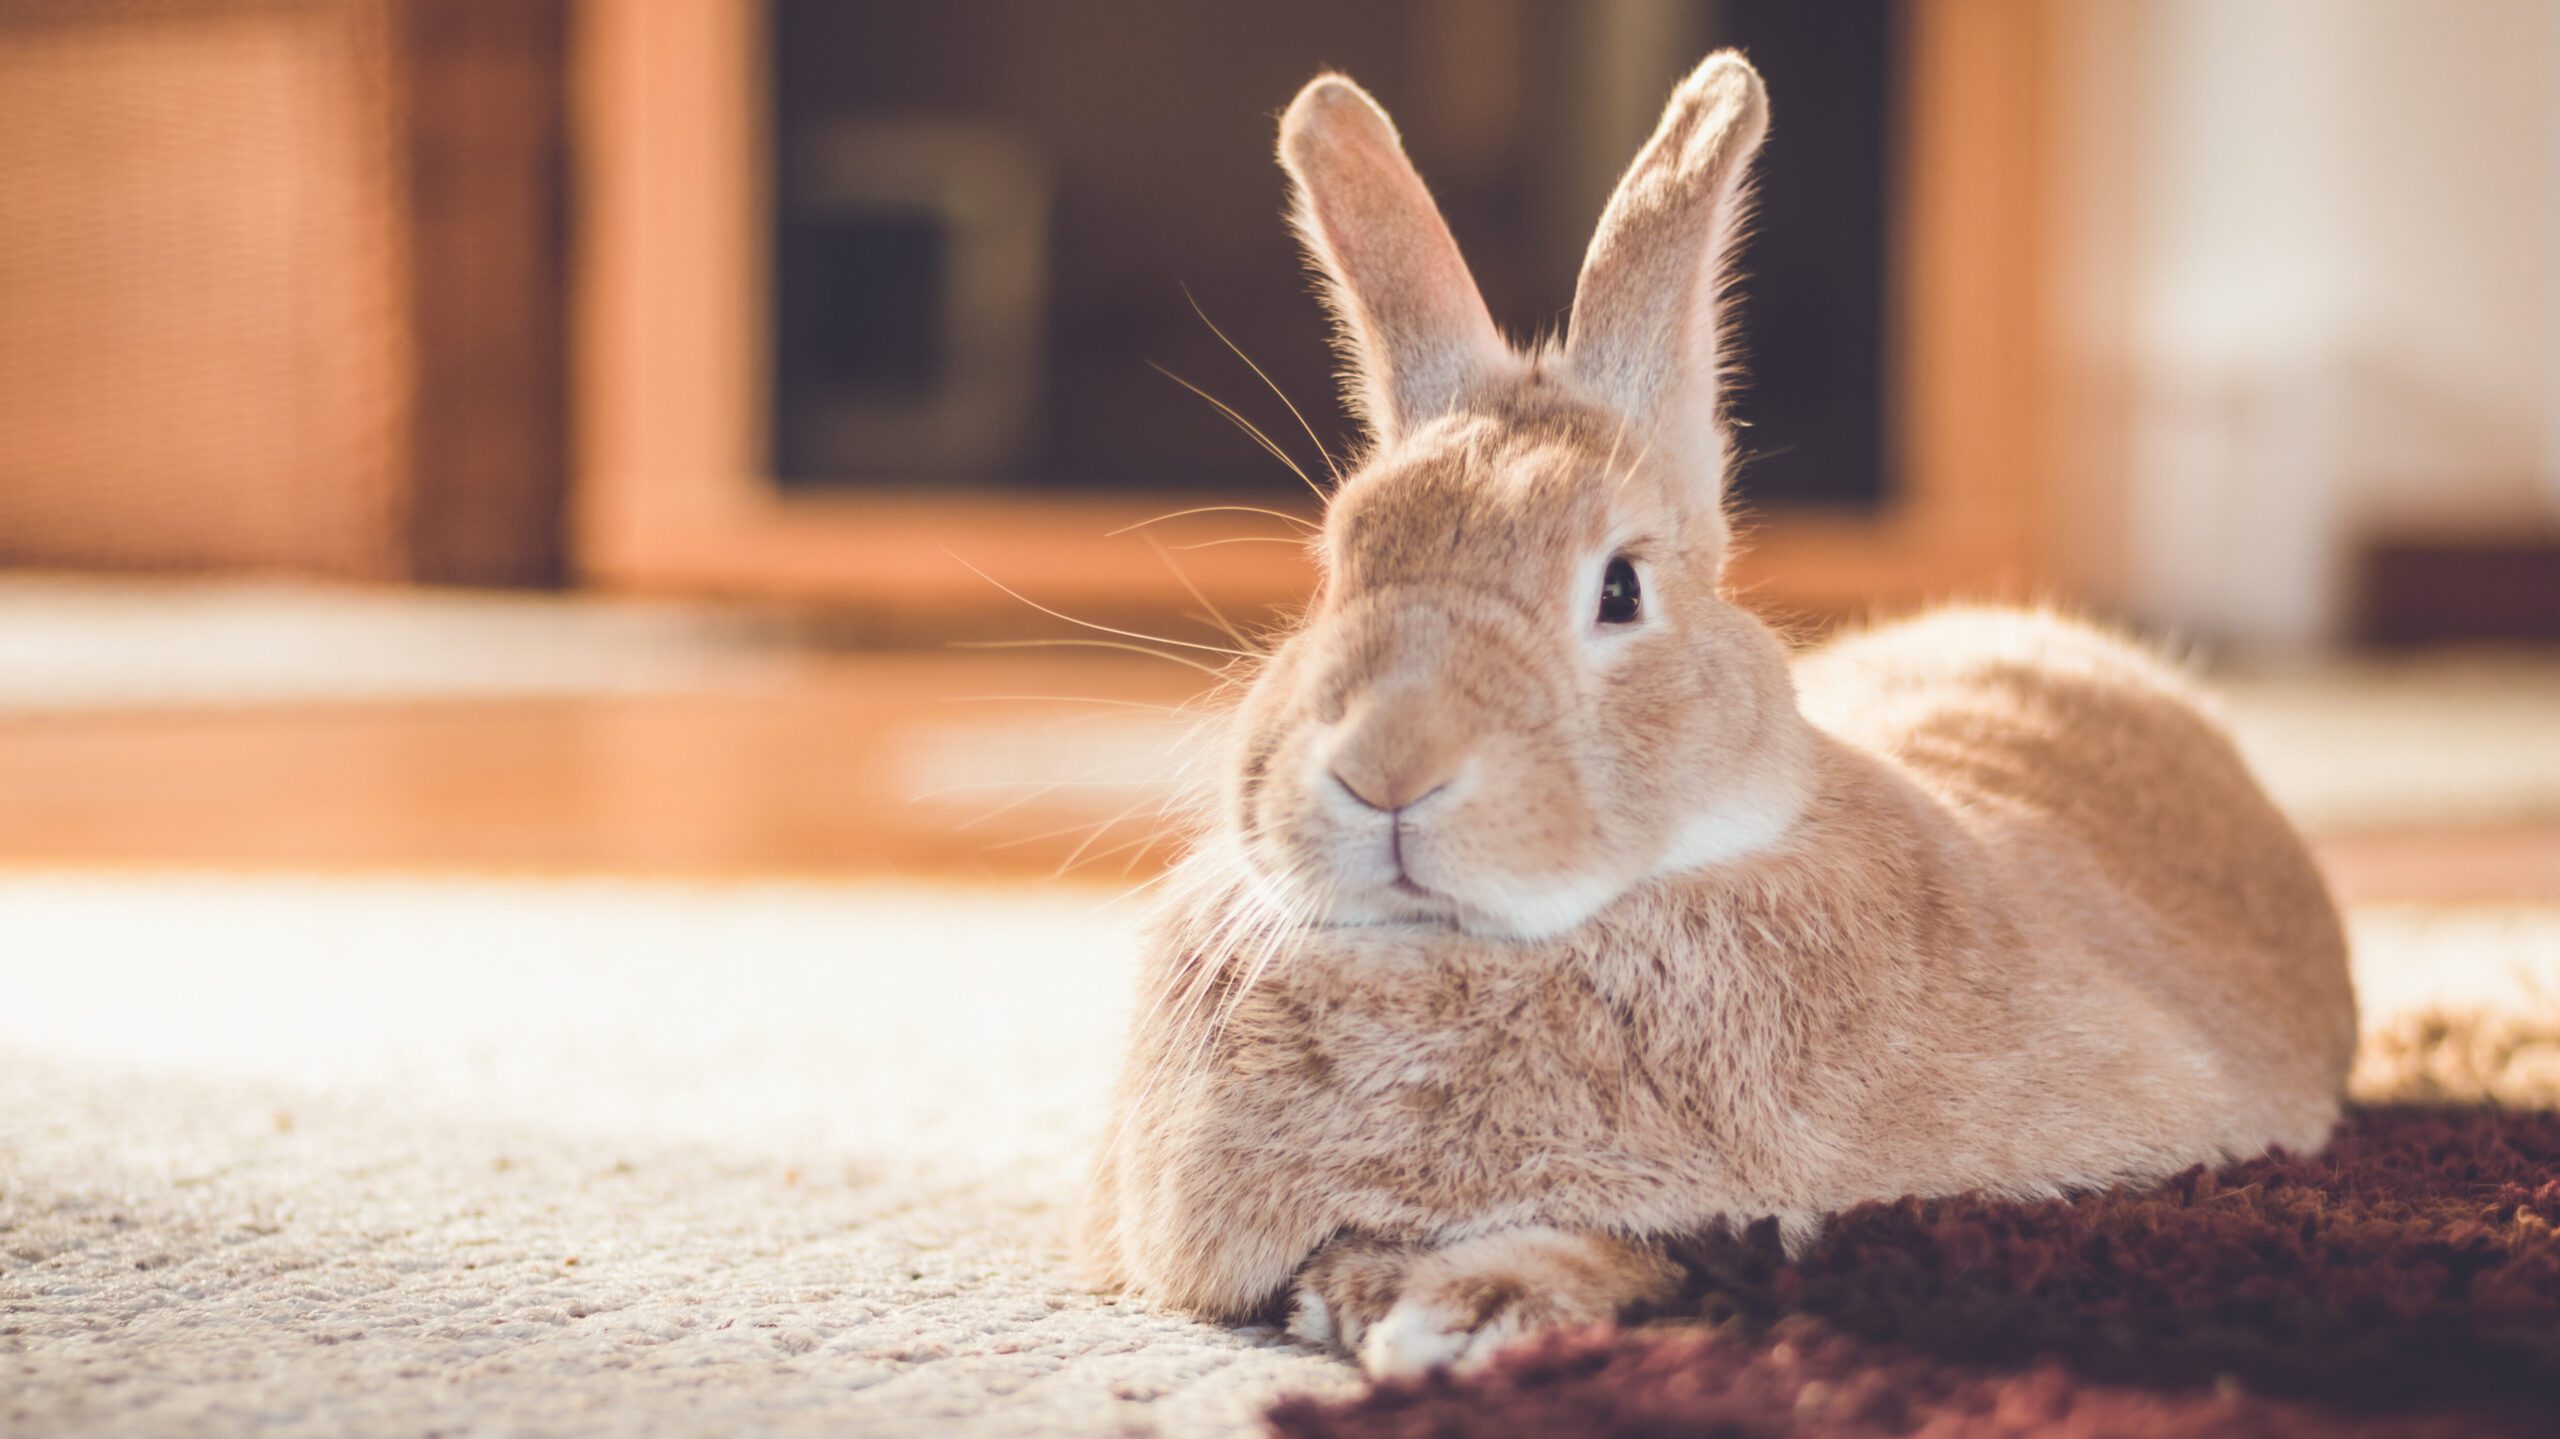 While your pet rabbit primarily thrives on hay and fresh water, they can also consume a variety of human foods in moderation.